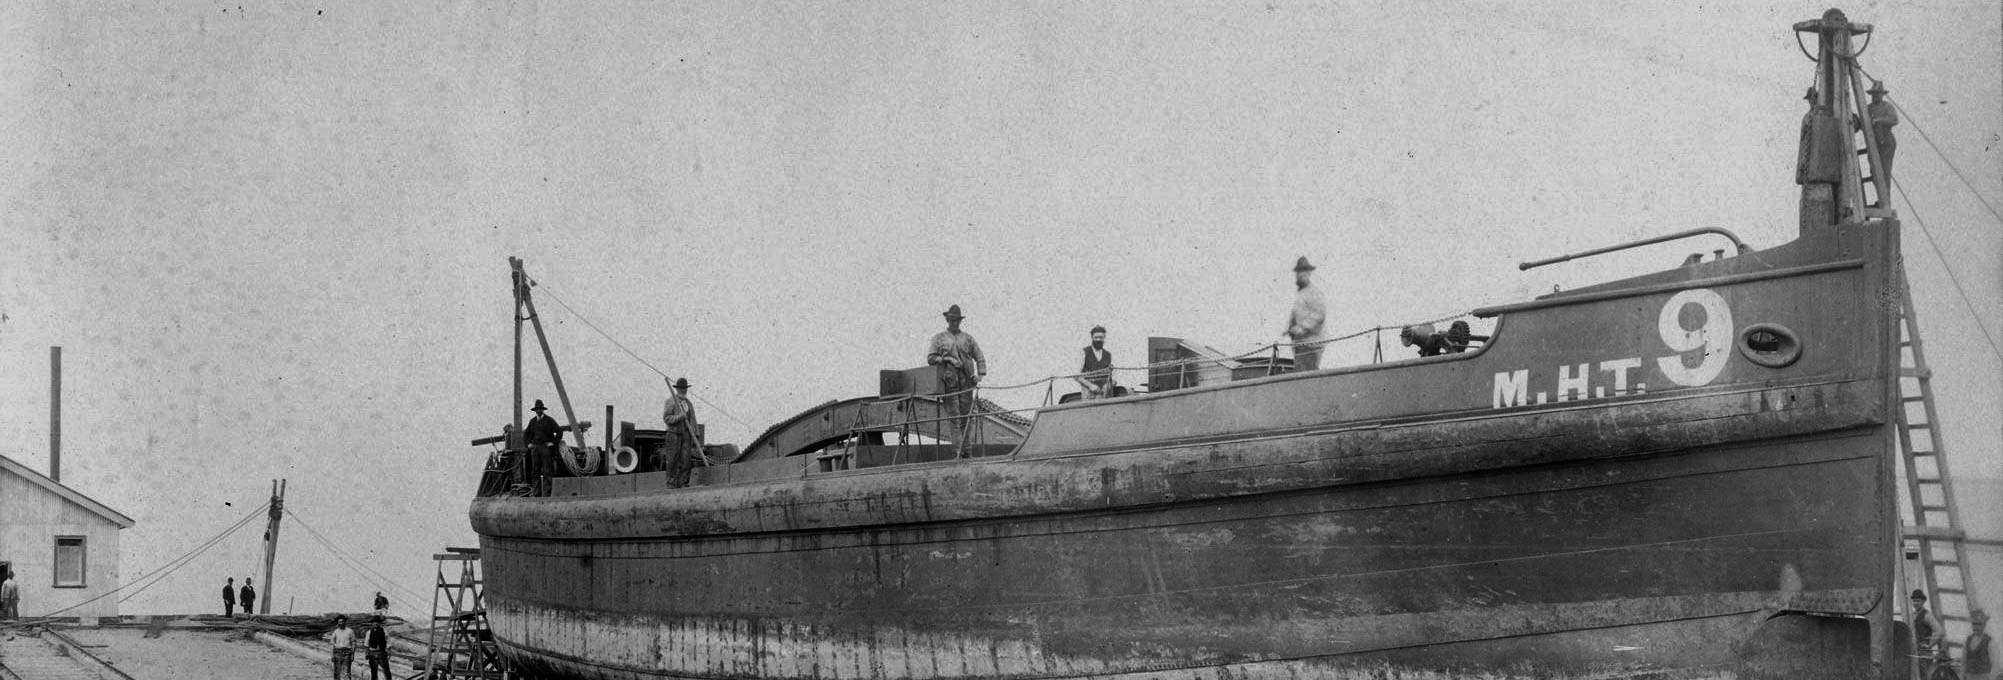 Black and white photo of a ship with crew